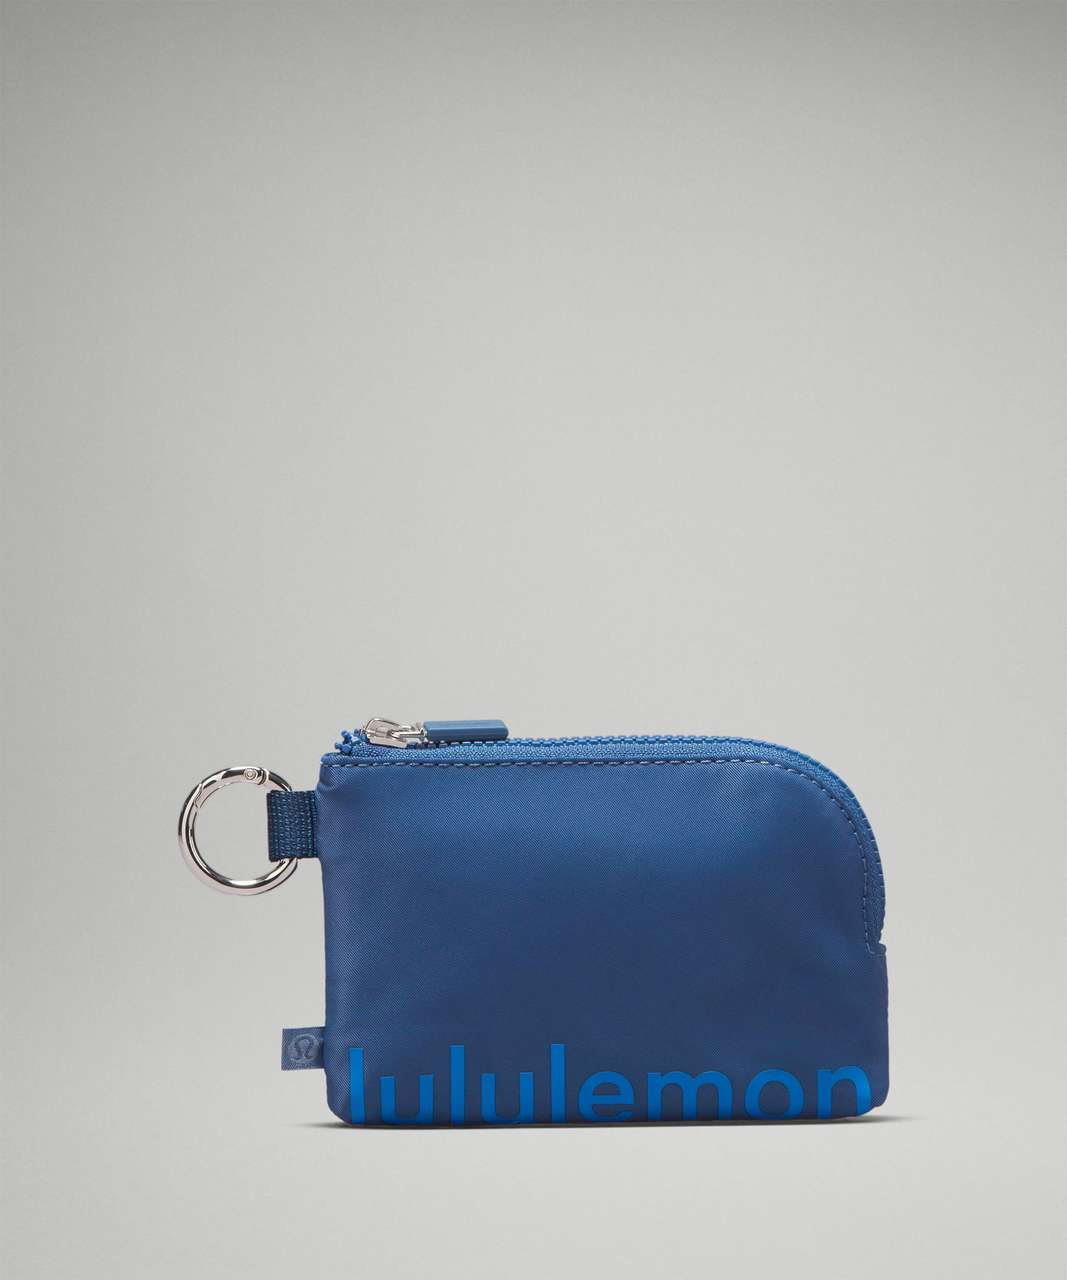 Lululemon Clippable Card Pouch - Pitch Blue / Pipe Dream Blue